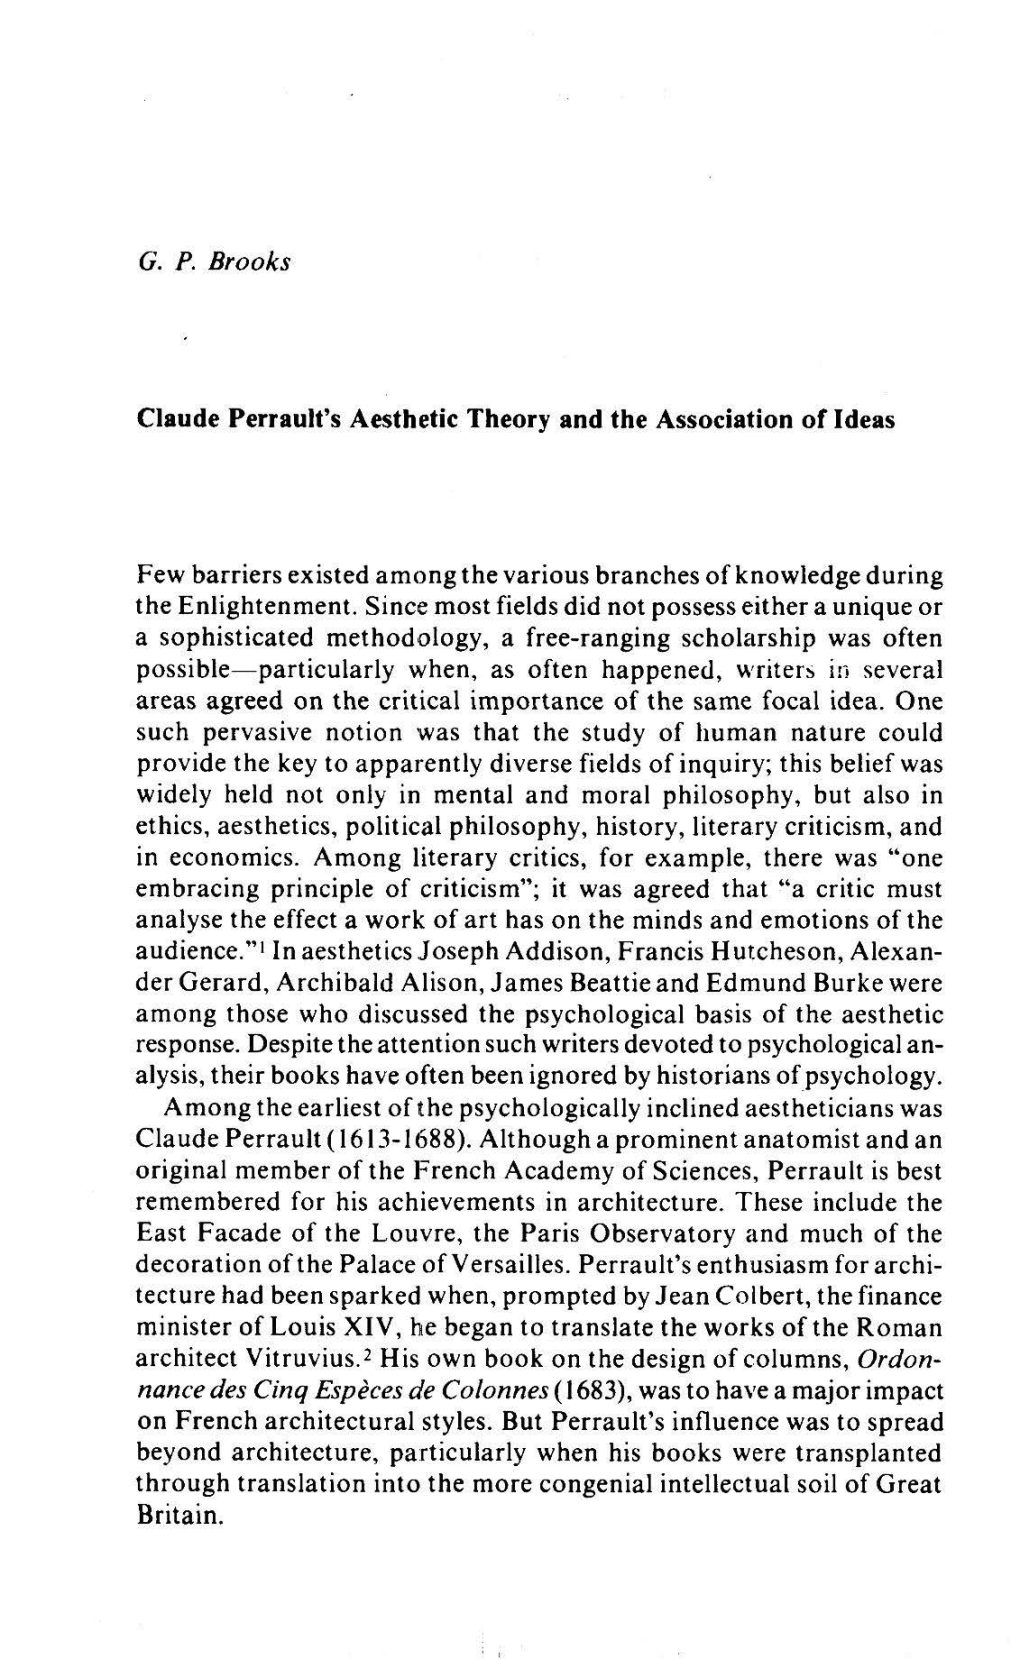 GP Brooks Claude Perrault's Aesthetic Theory and The